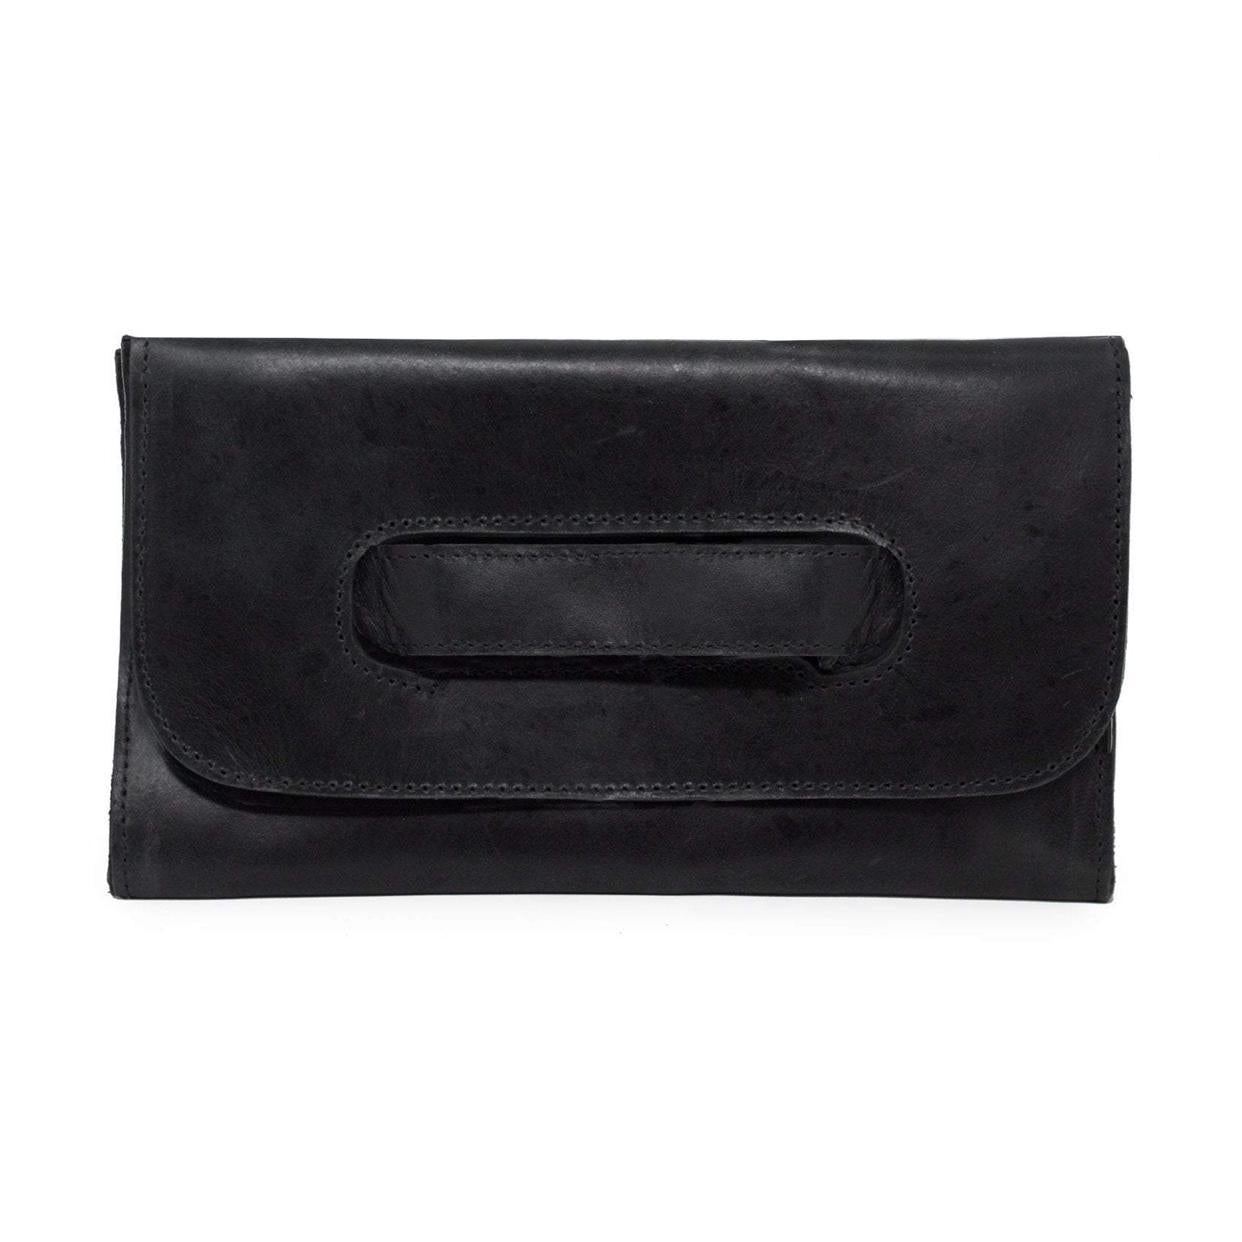 Able Mare Handle Clutch Handbags in Black at Wrapsody